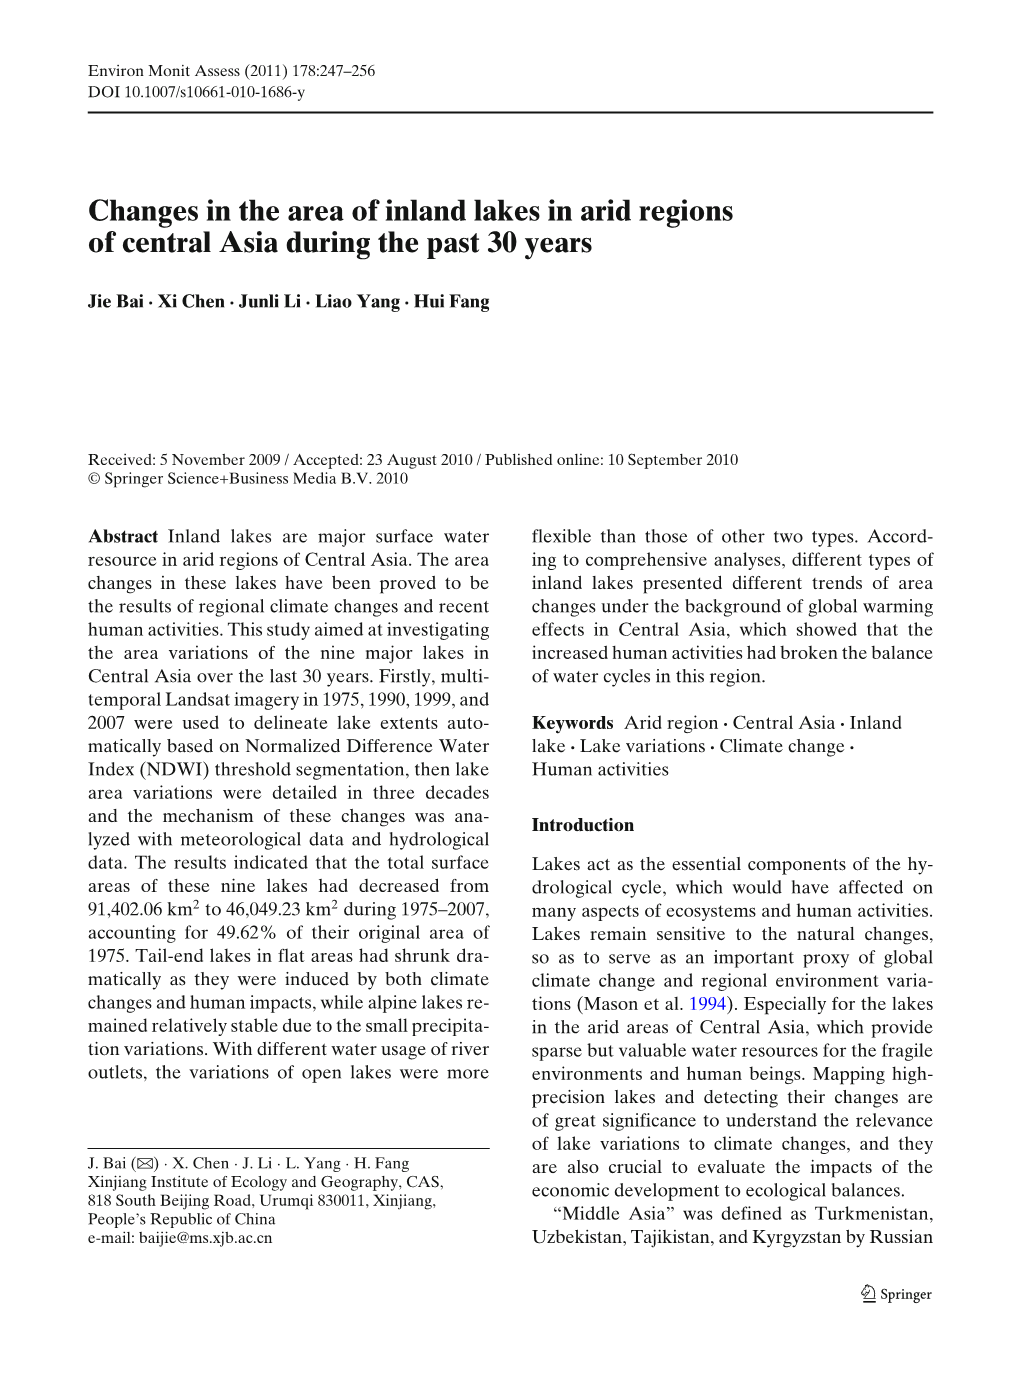 Changes in the Area of Inland Lakes in Arid Regions of Central Asia During the Past 30 Years